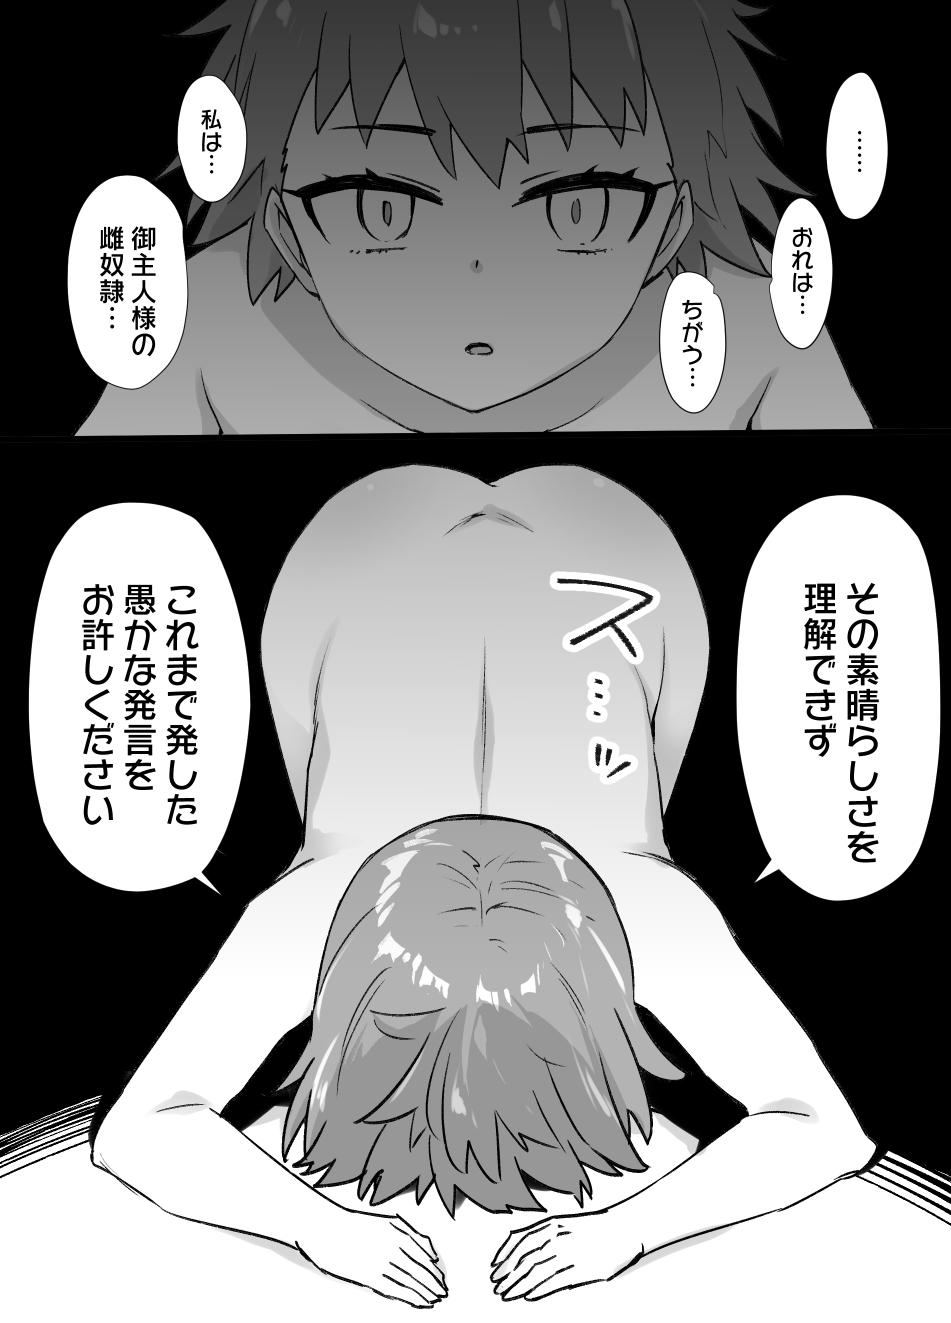 Lady A manga about Shirou Emiya who went to save Rin Tohsaka from captivity and is transformed into a female slave through physical feminization and brainwashing[Fate/ stay night) - Fate stay night Viet Nam - Page 6